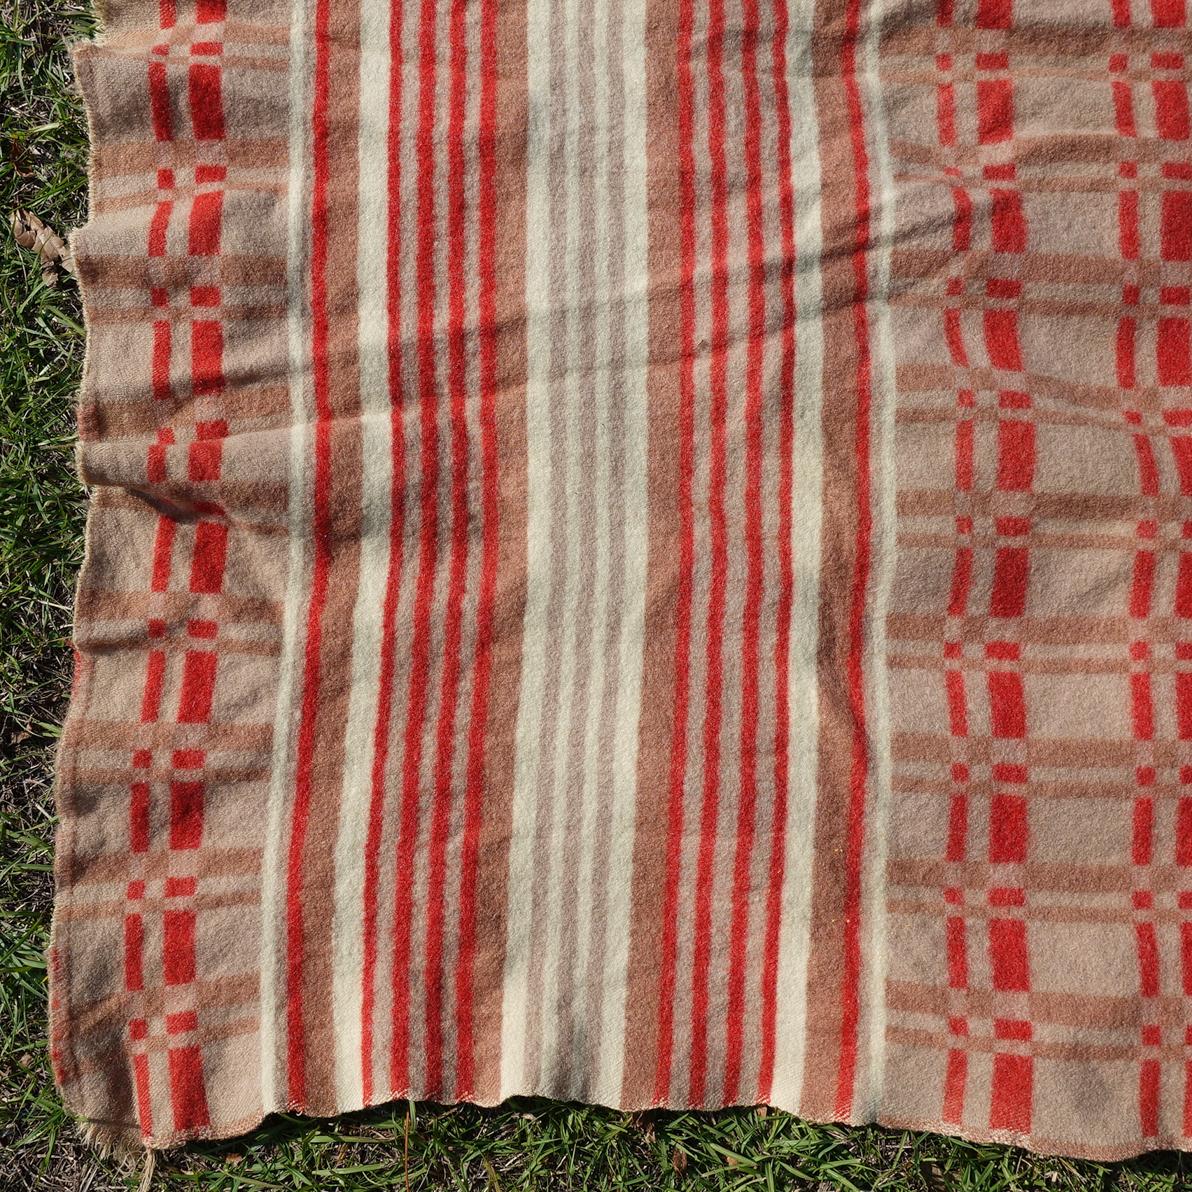  Vintage 1900s hose blanket Horse Blanket rug mat / antique 1900 period the first head camp picnic mountain li search g